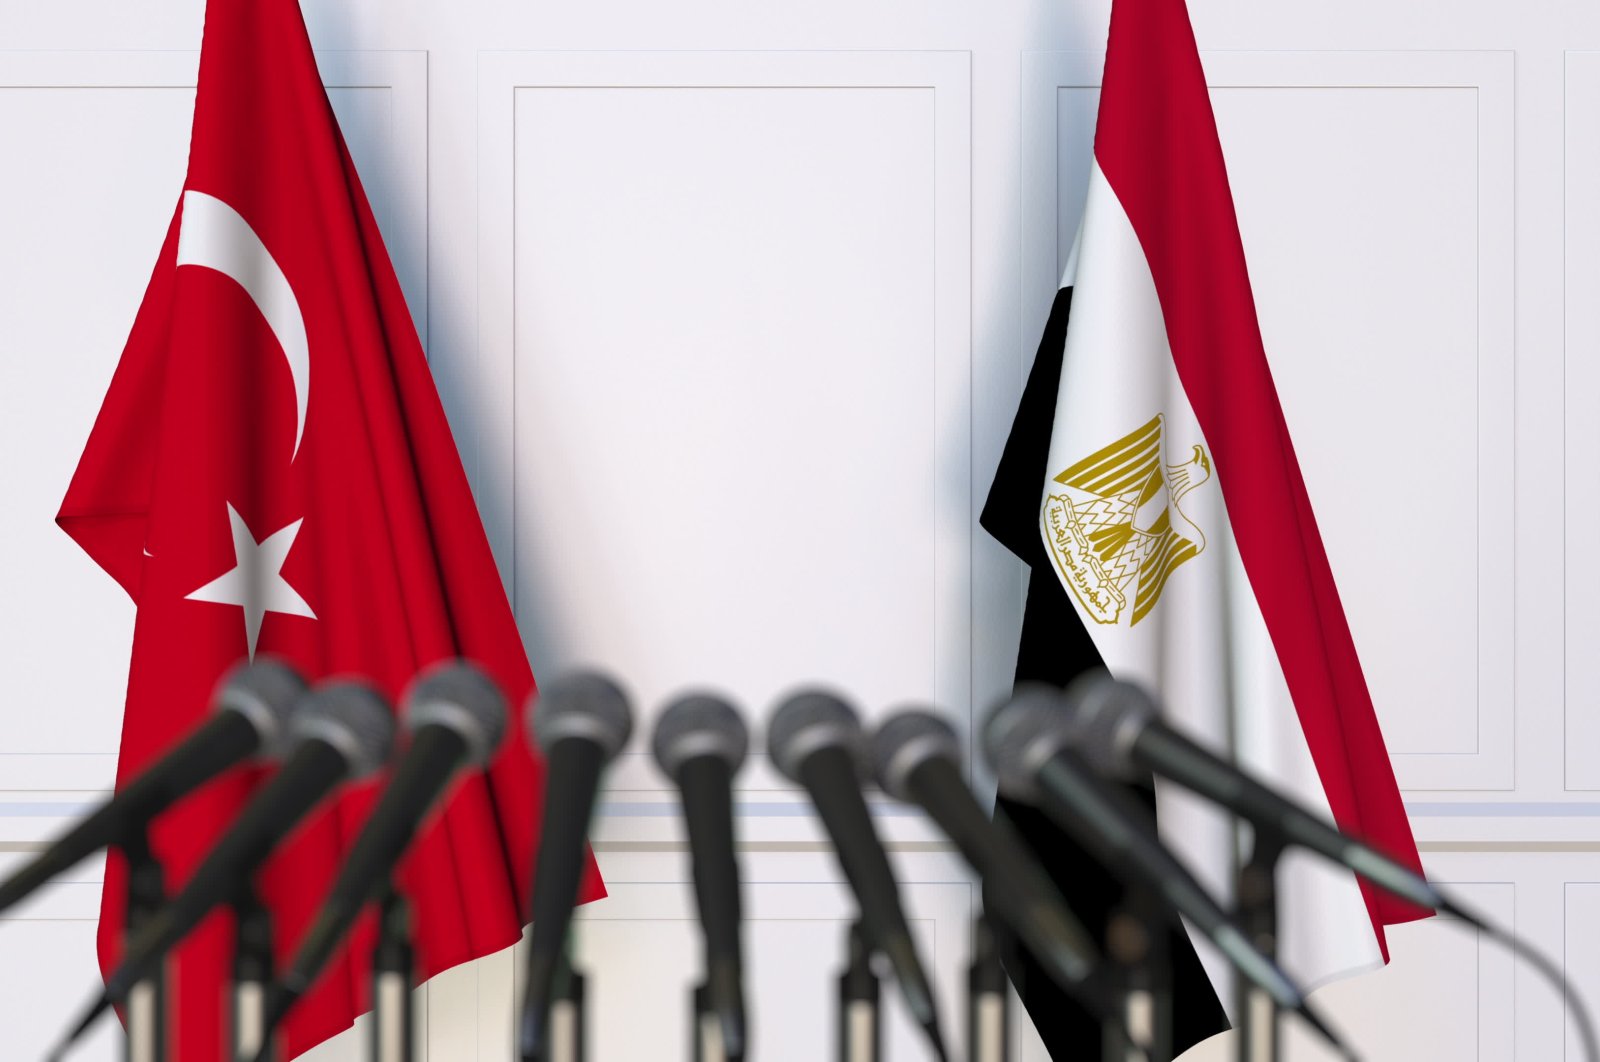 Experts argue that a more reconciliatory tone between Turkey and Egypt could pave the way for deeper economic relations at a time when developing countries need to cooperate to shield themselves from financial crises. (Shutterstock Photo)